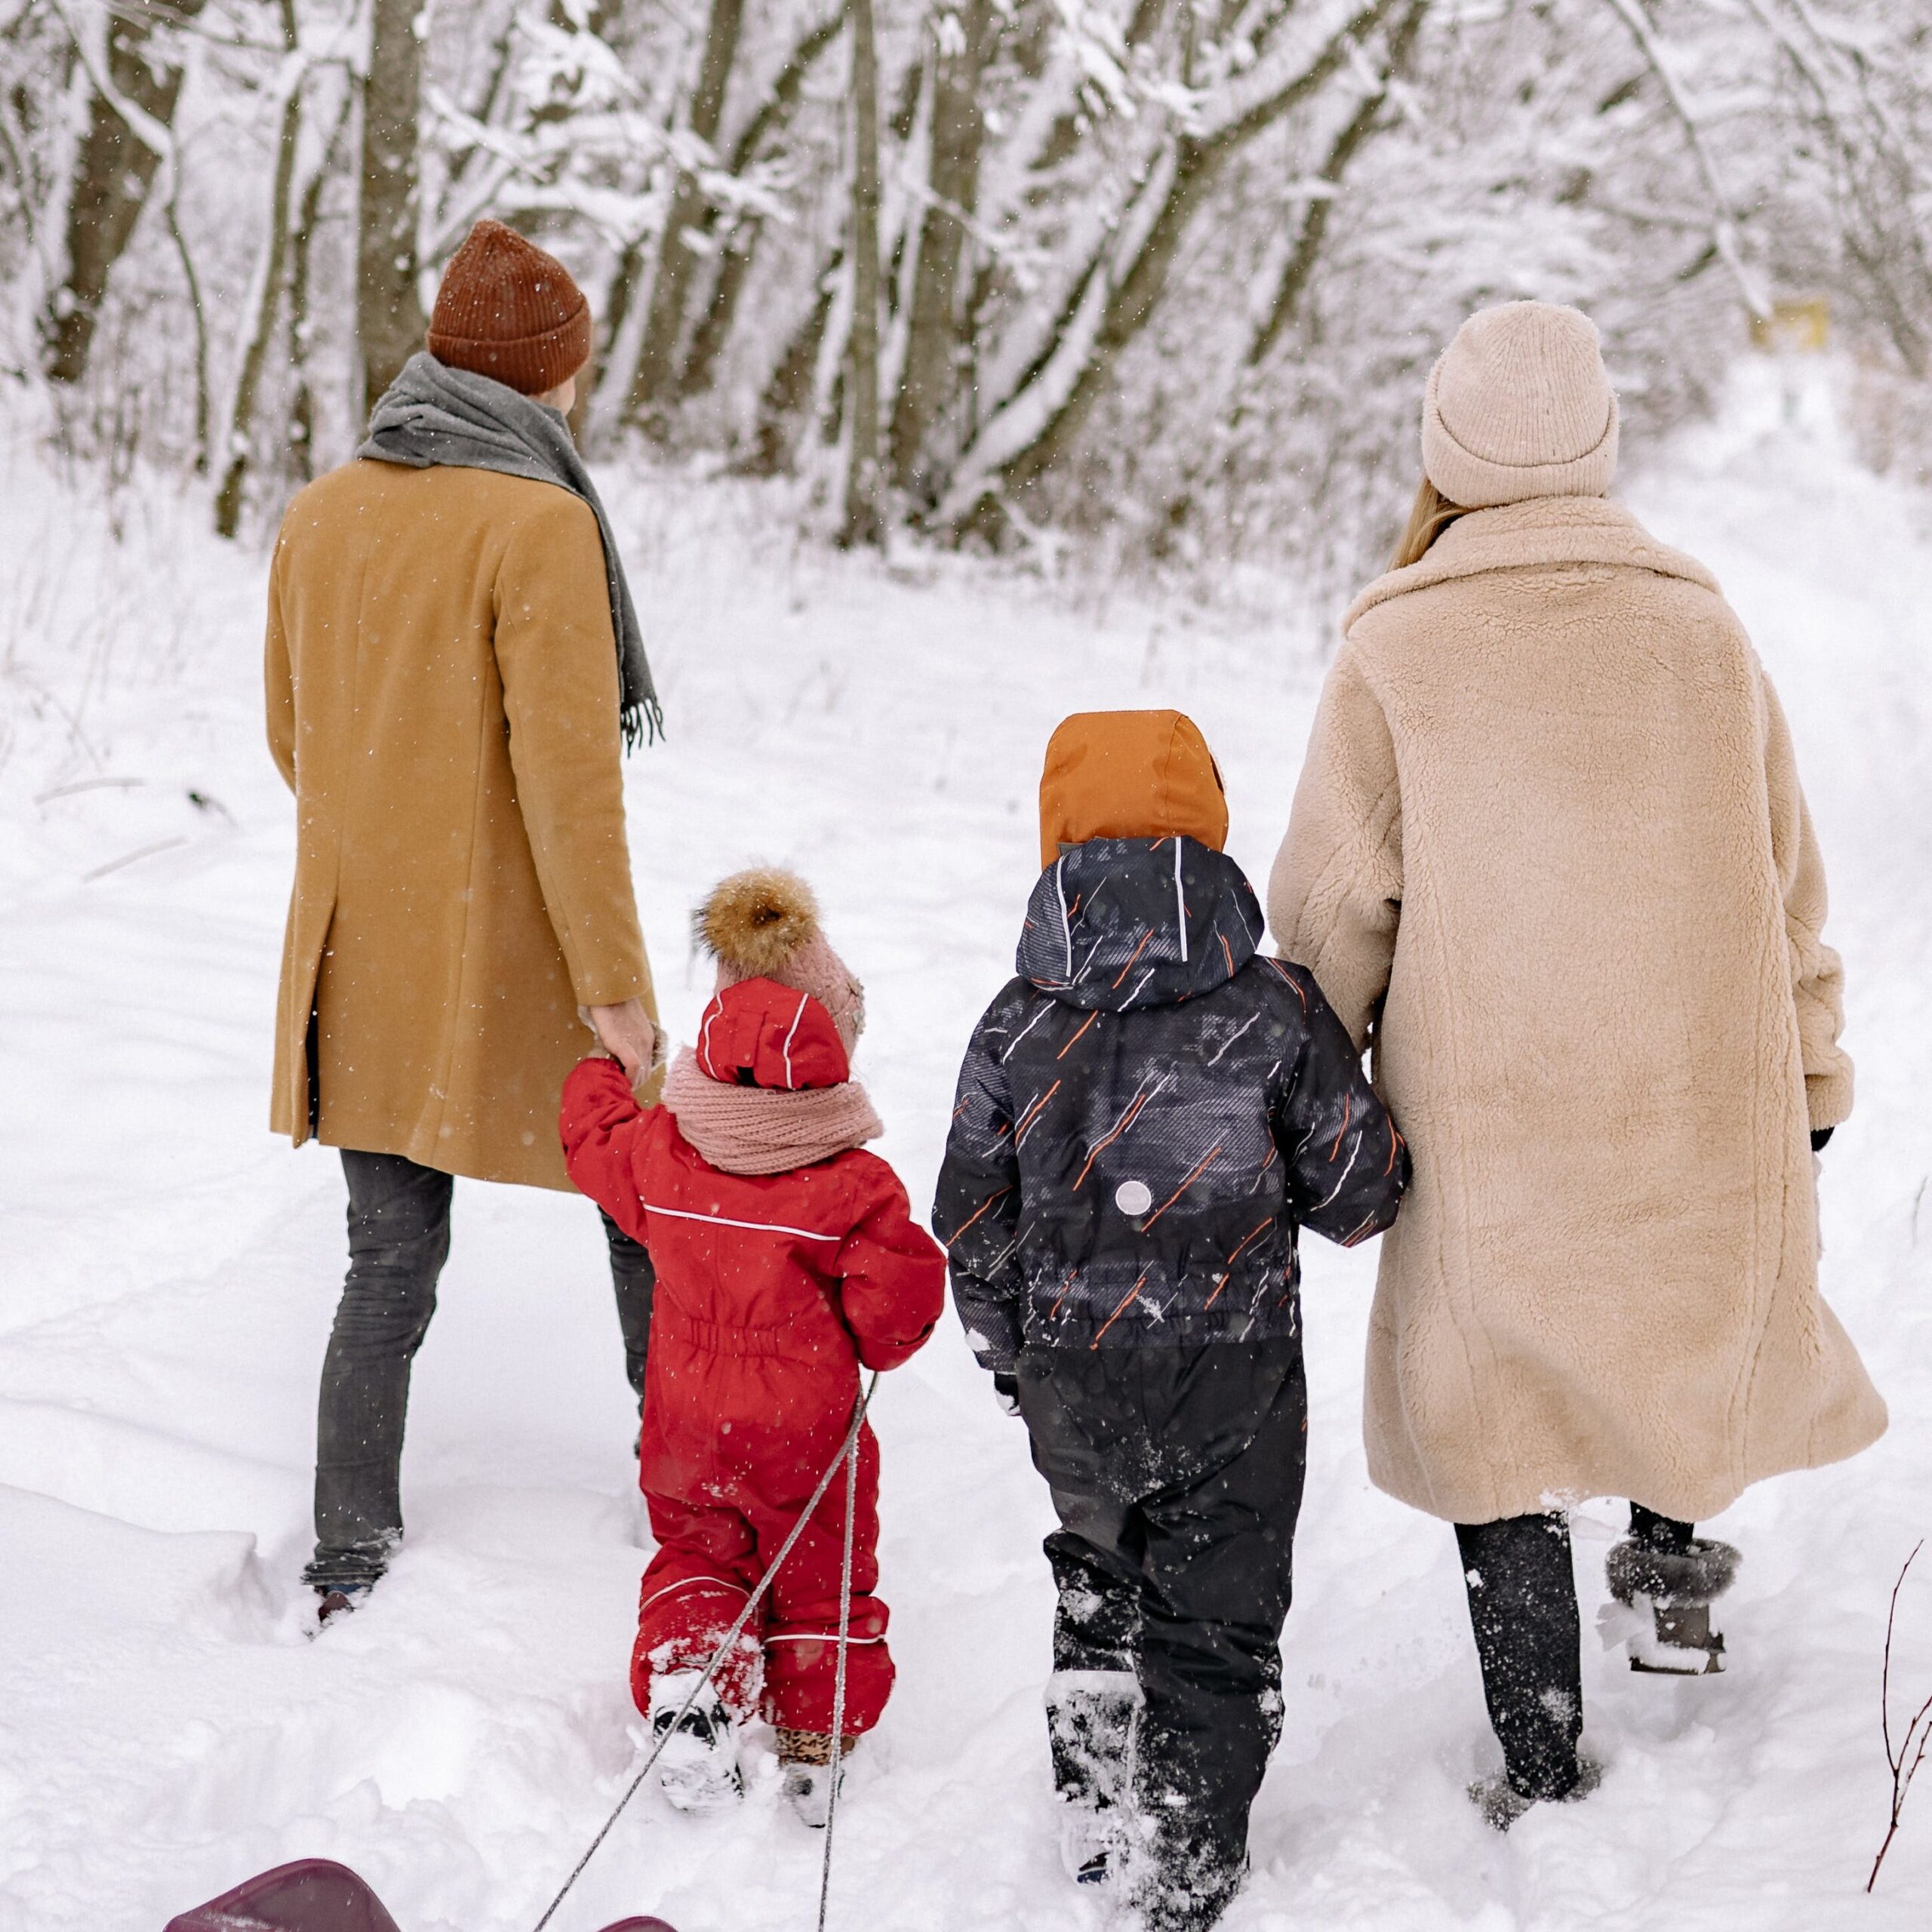  Residential Family In the winter Photo by Yan Krukau: https://www.pexels.com/photo/back-view-of-a-family-in-winter-clothes-walking-on-a-snow-covered-ground-6617800/